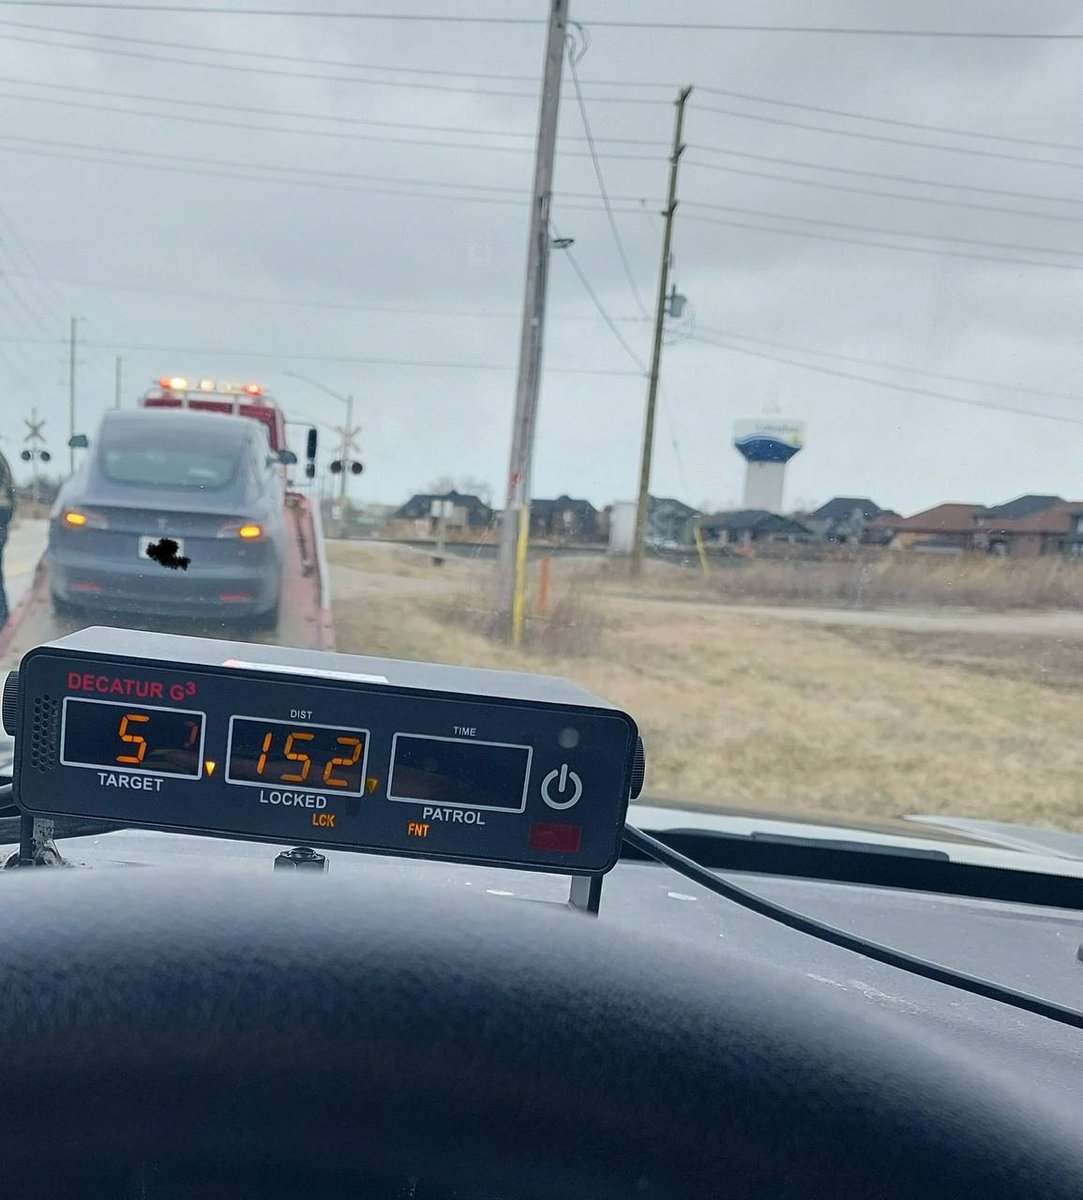 A 20-year-old driver from the GTA was stopped by a member of the Lakeshore detachment on Rourke Line Road in the Municipality of Lakeshore for driving 152 km/h in a posted 50km/h zone.^sd

#EssexCtyOPP #StuntDriving #30DayLicenceSuspension #14DayVehicleImpound